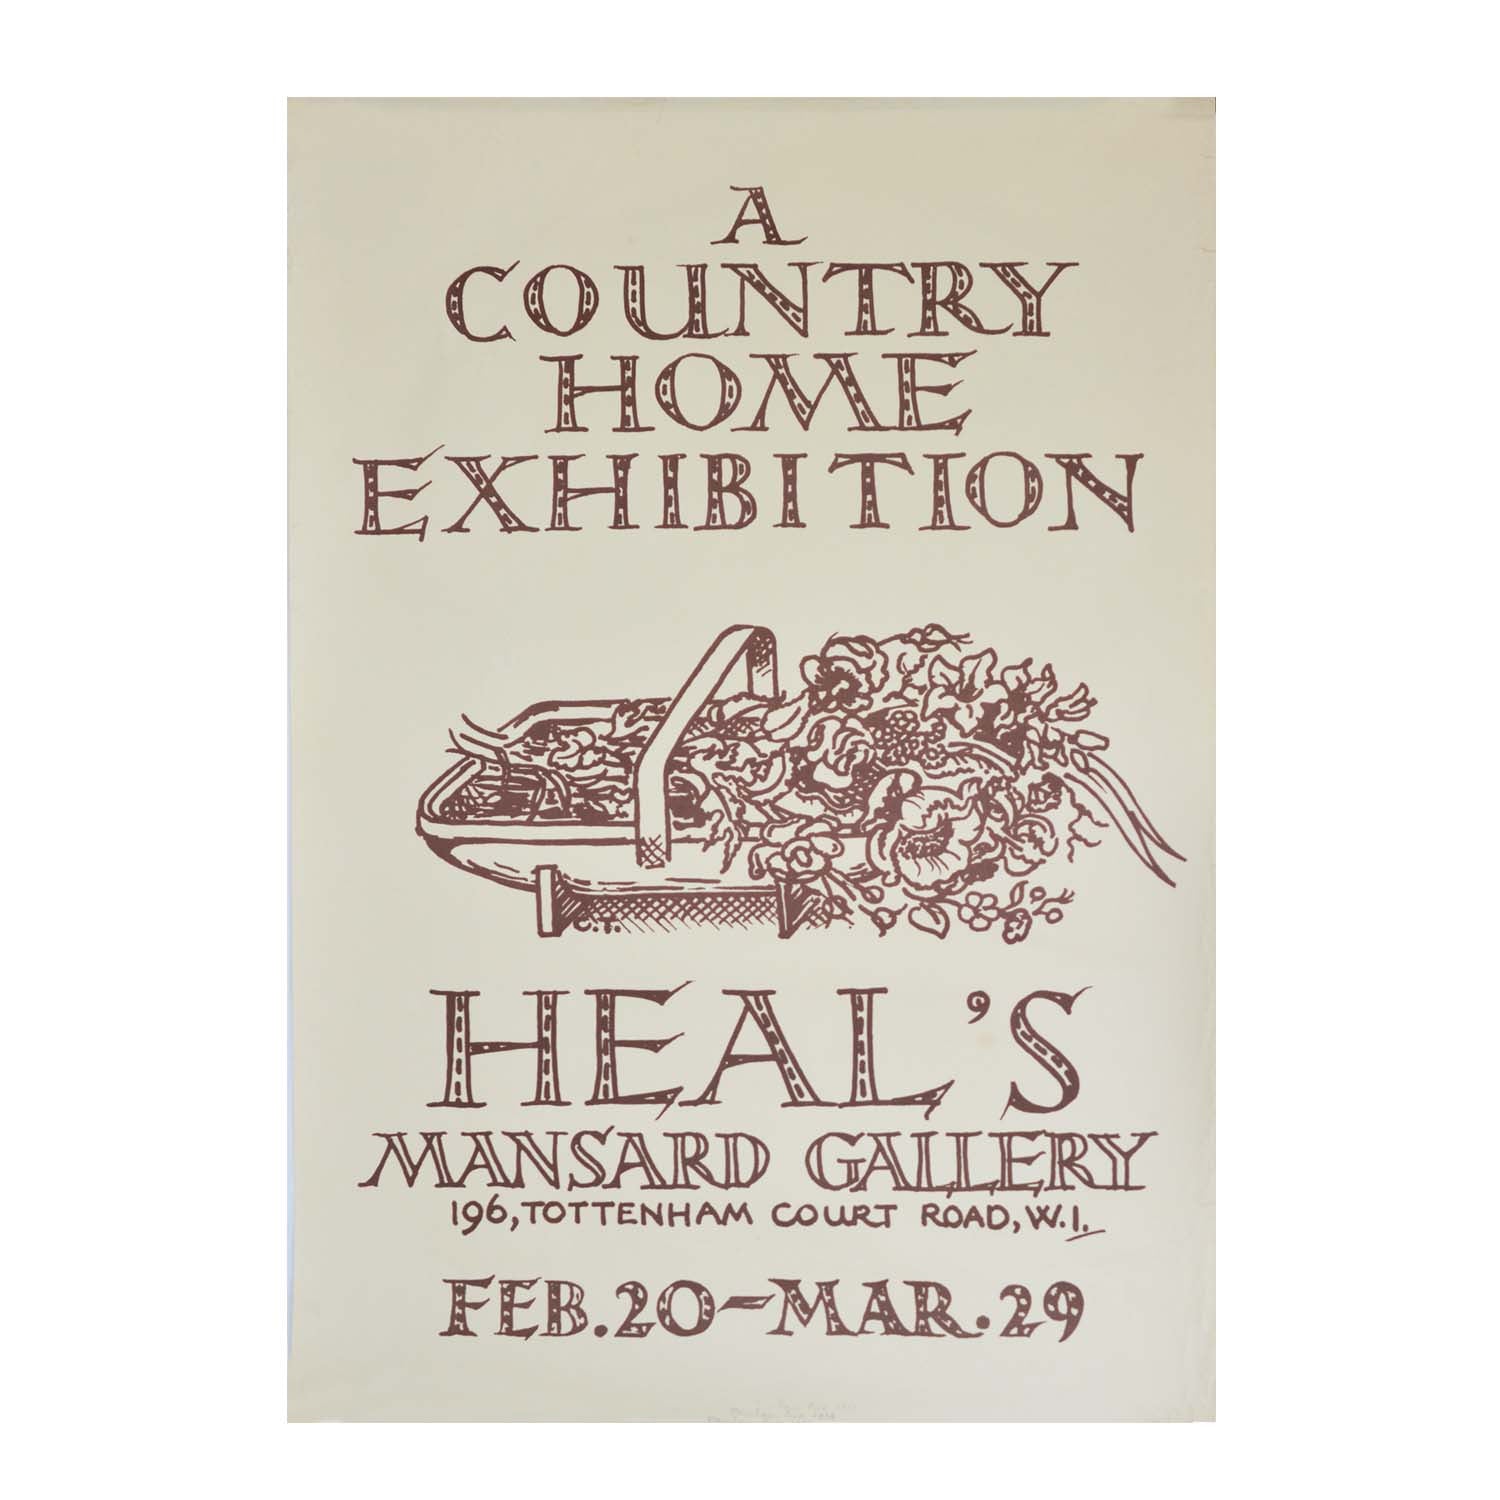 An original poster for an exhibition of ‘Country Home’ interior design at the Mansard Gallery in Heal’s Department Store. The poster features a basket of flowers. 